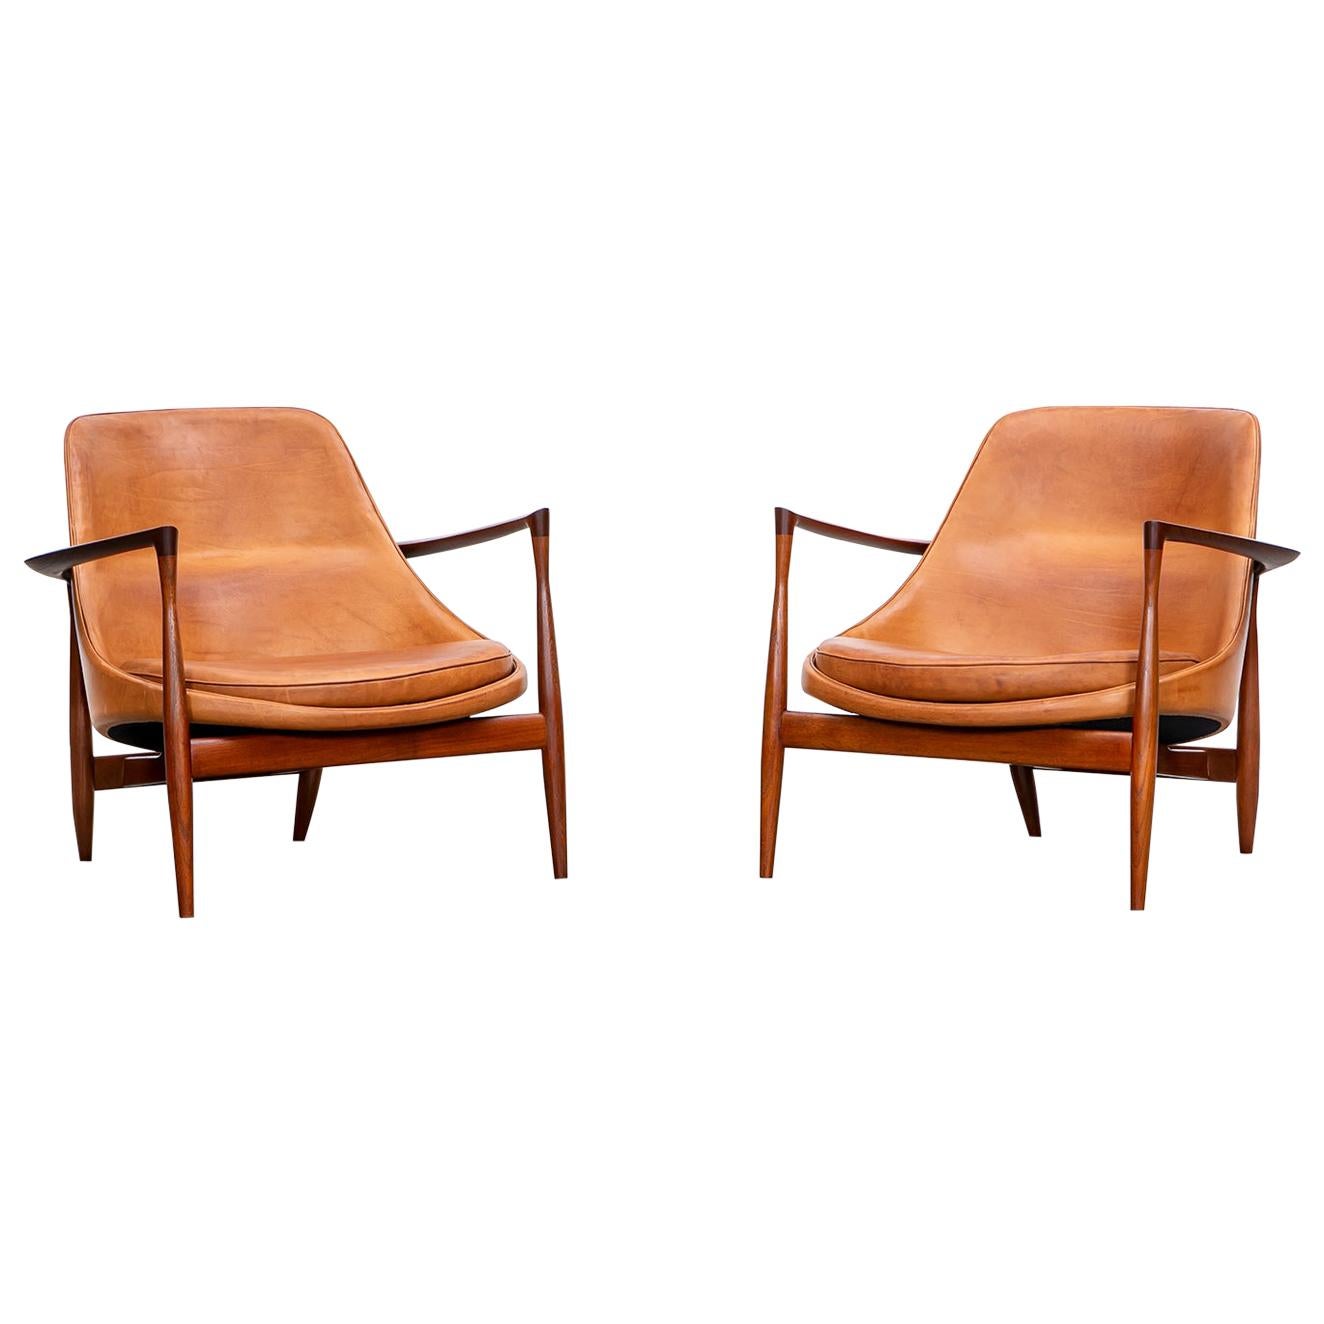 1950's Brown Wooden and Leather Pair of Lounge Chairs by Ib Kofod-Larsen